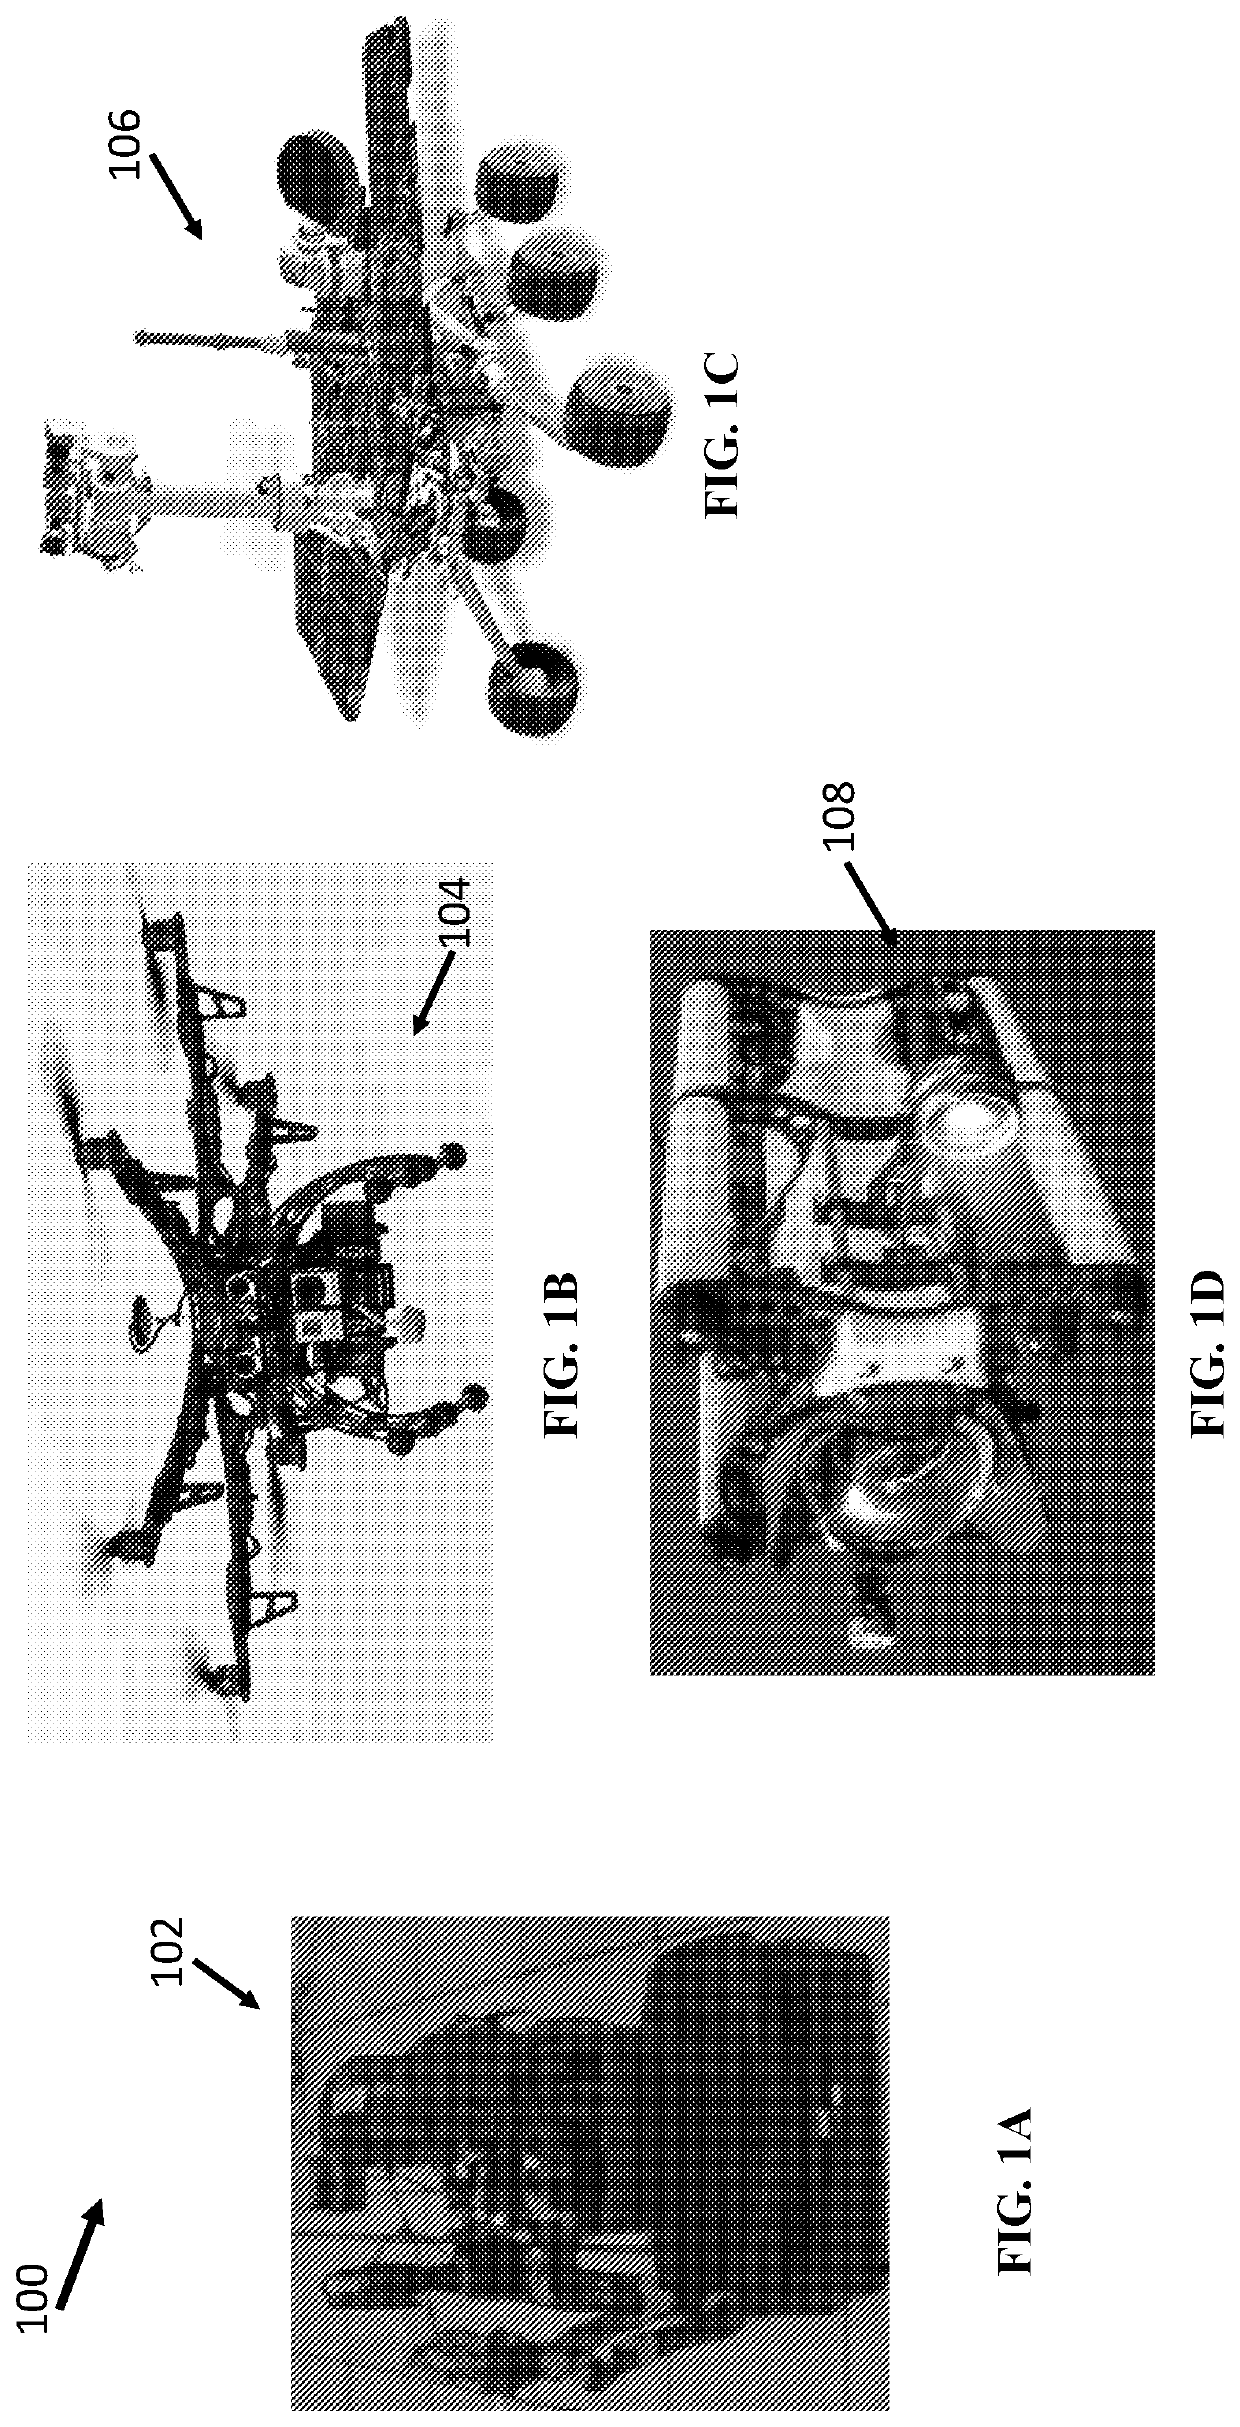 Systems and methods for operating robots using object-oriented partially observable markov decision processes